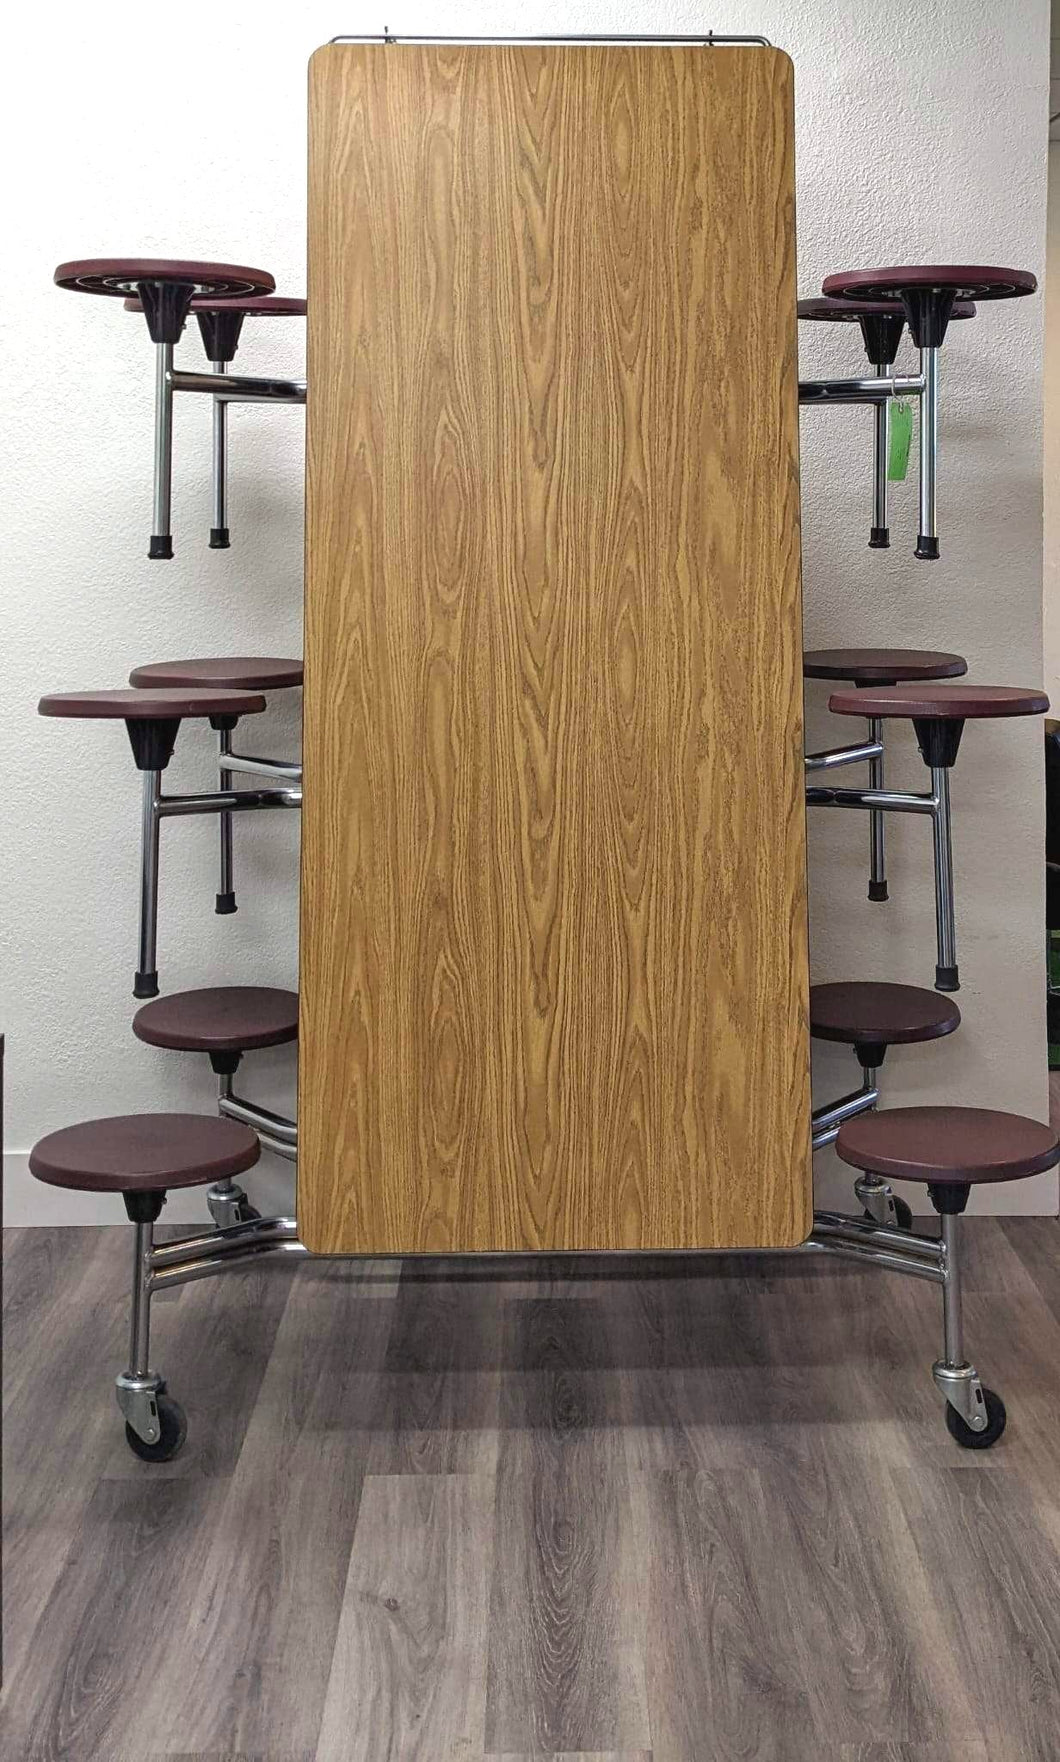 10ft Cafeteria Lunch Table w/ 12 Stool Seat, Wood Grain Oak Top, Burgundy Seat, Adult Size (RF)